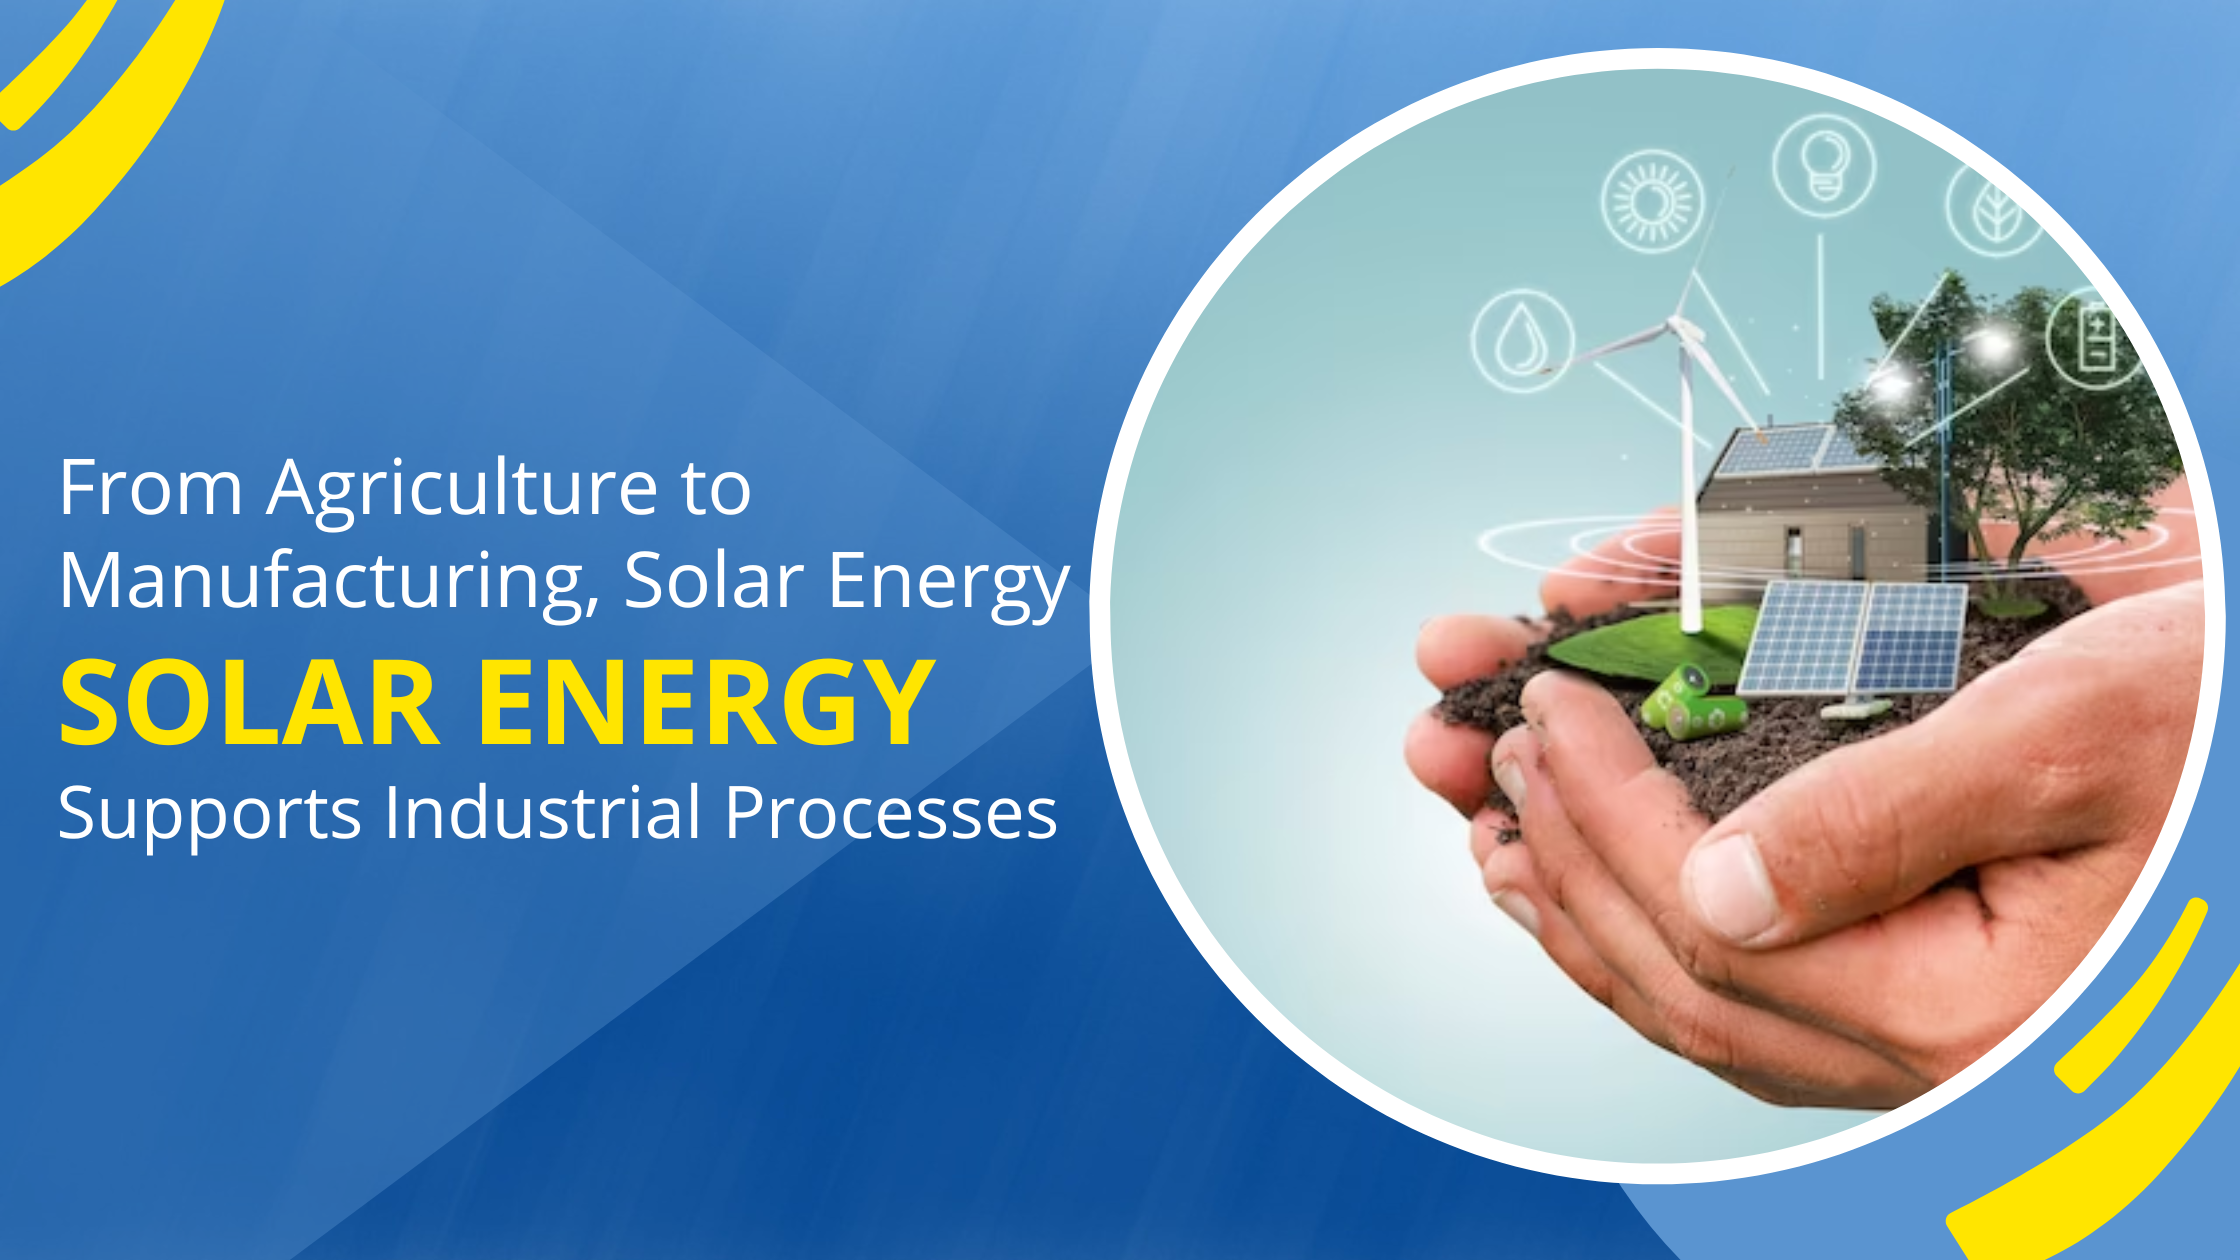 From Agriculture to Manufacturing, Solar Energy Supports Industrial Processes